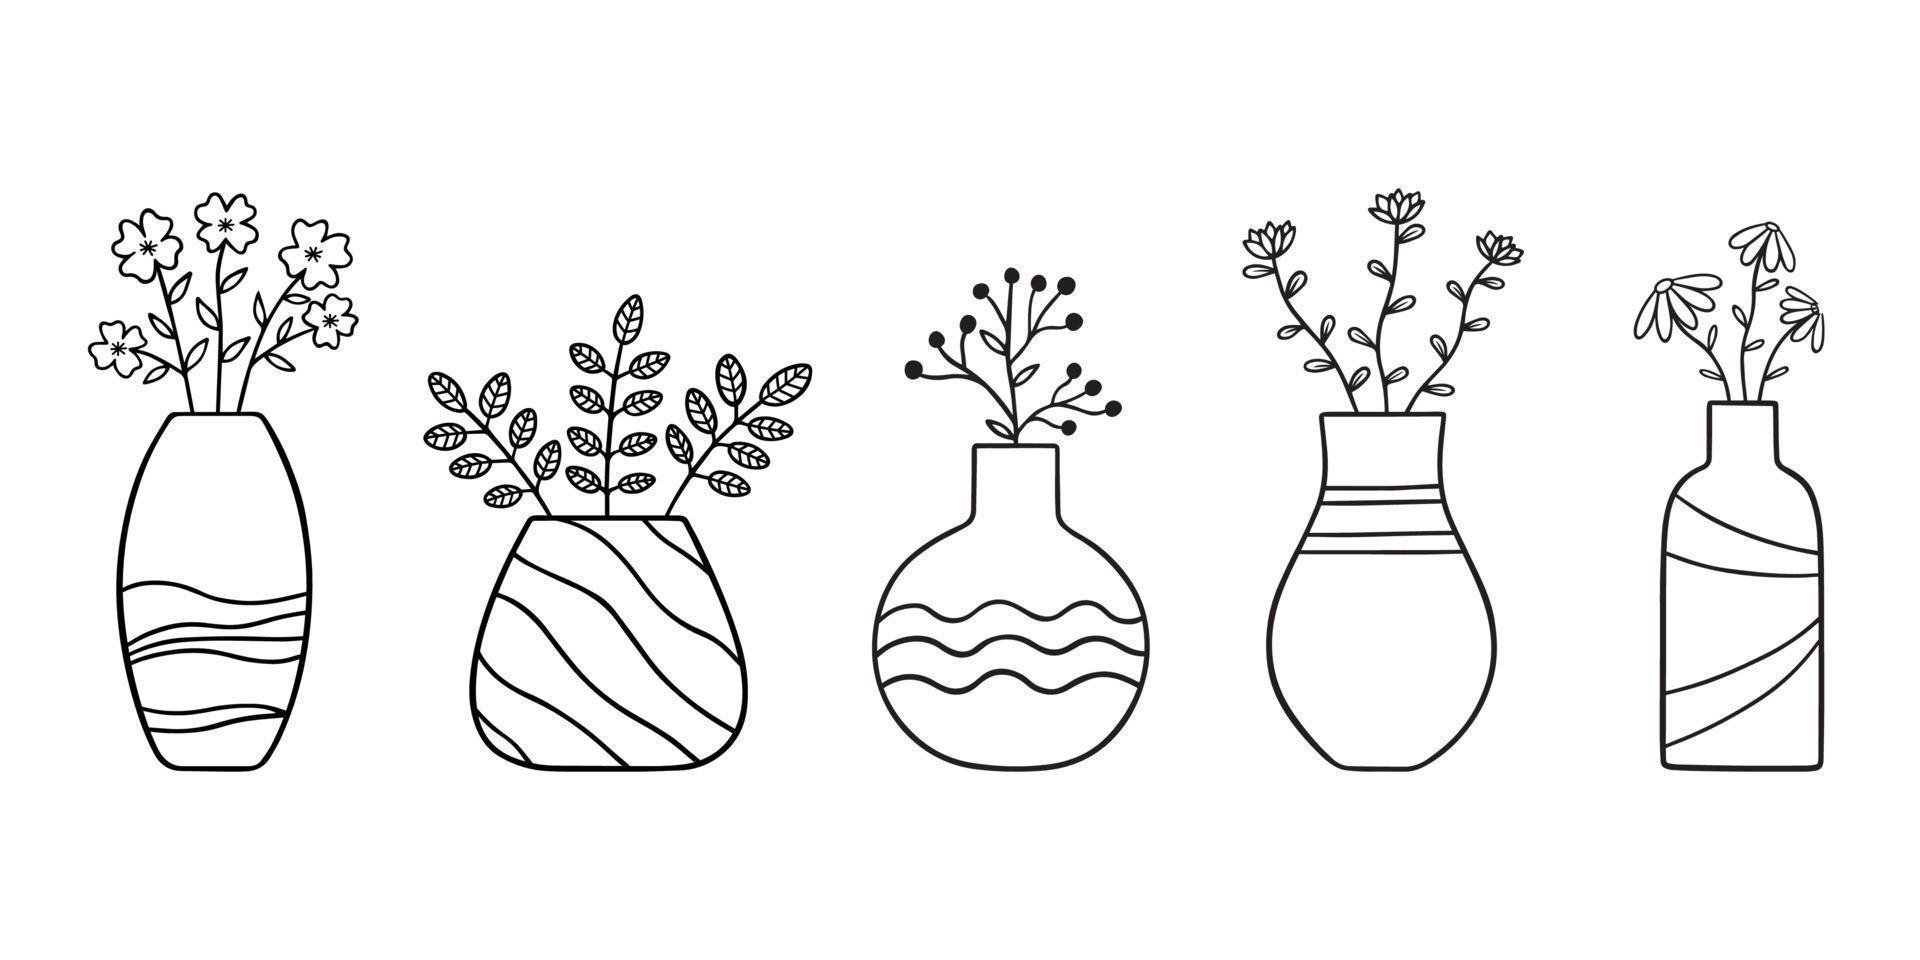 Hand drawn set of flowers and branches in a vase. doodle.  Home plants in sketch style.  Vector illustration isolated on white background.